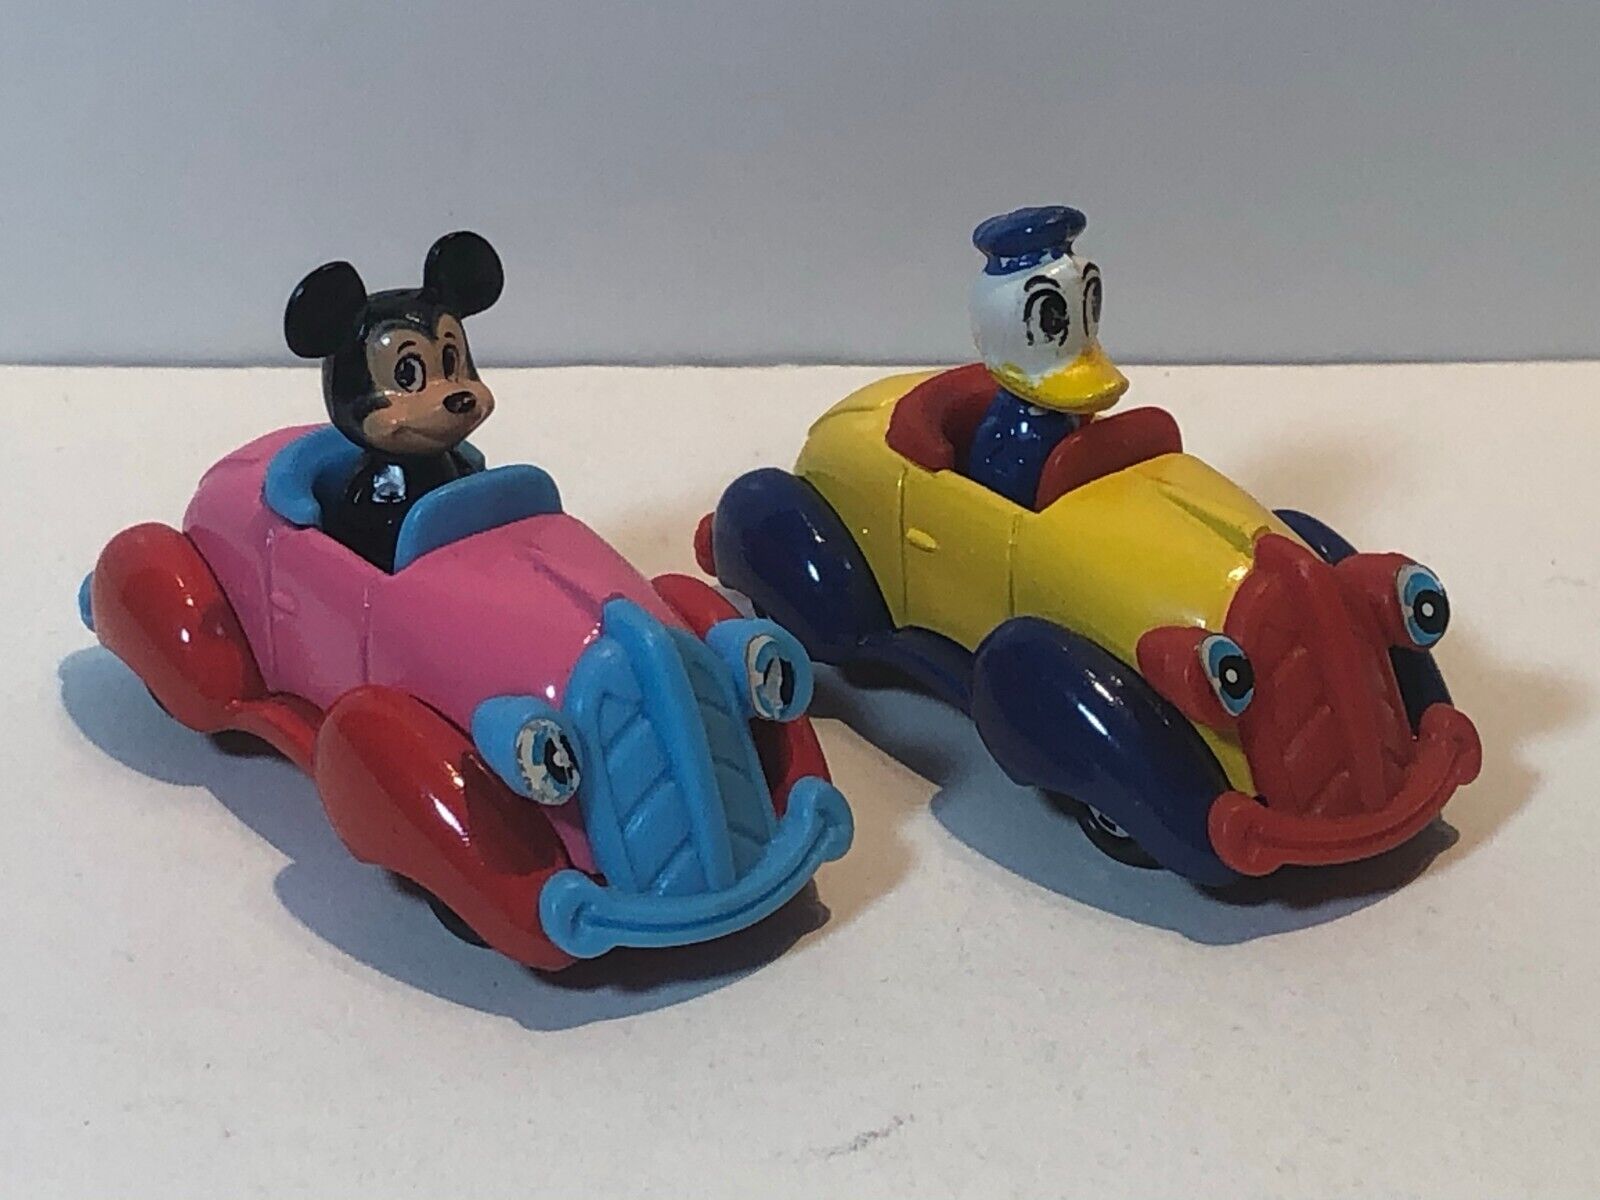 TOMY TOMICA No.55/56 MICKEY MOUSE & DONALD DUCK DIECAST CARS MADE IN JAPAN 1970